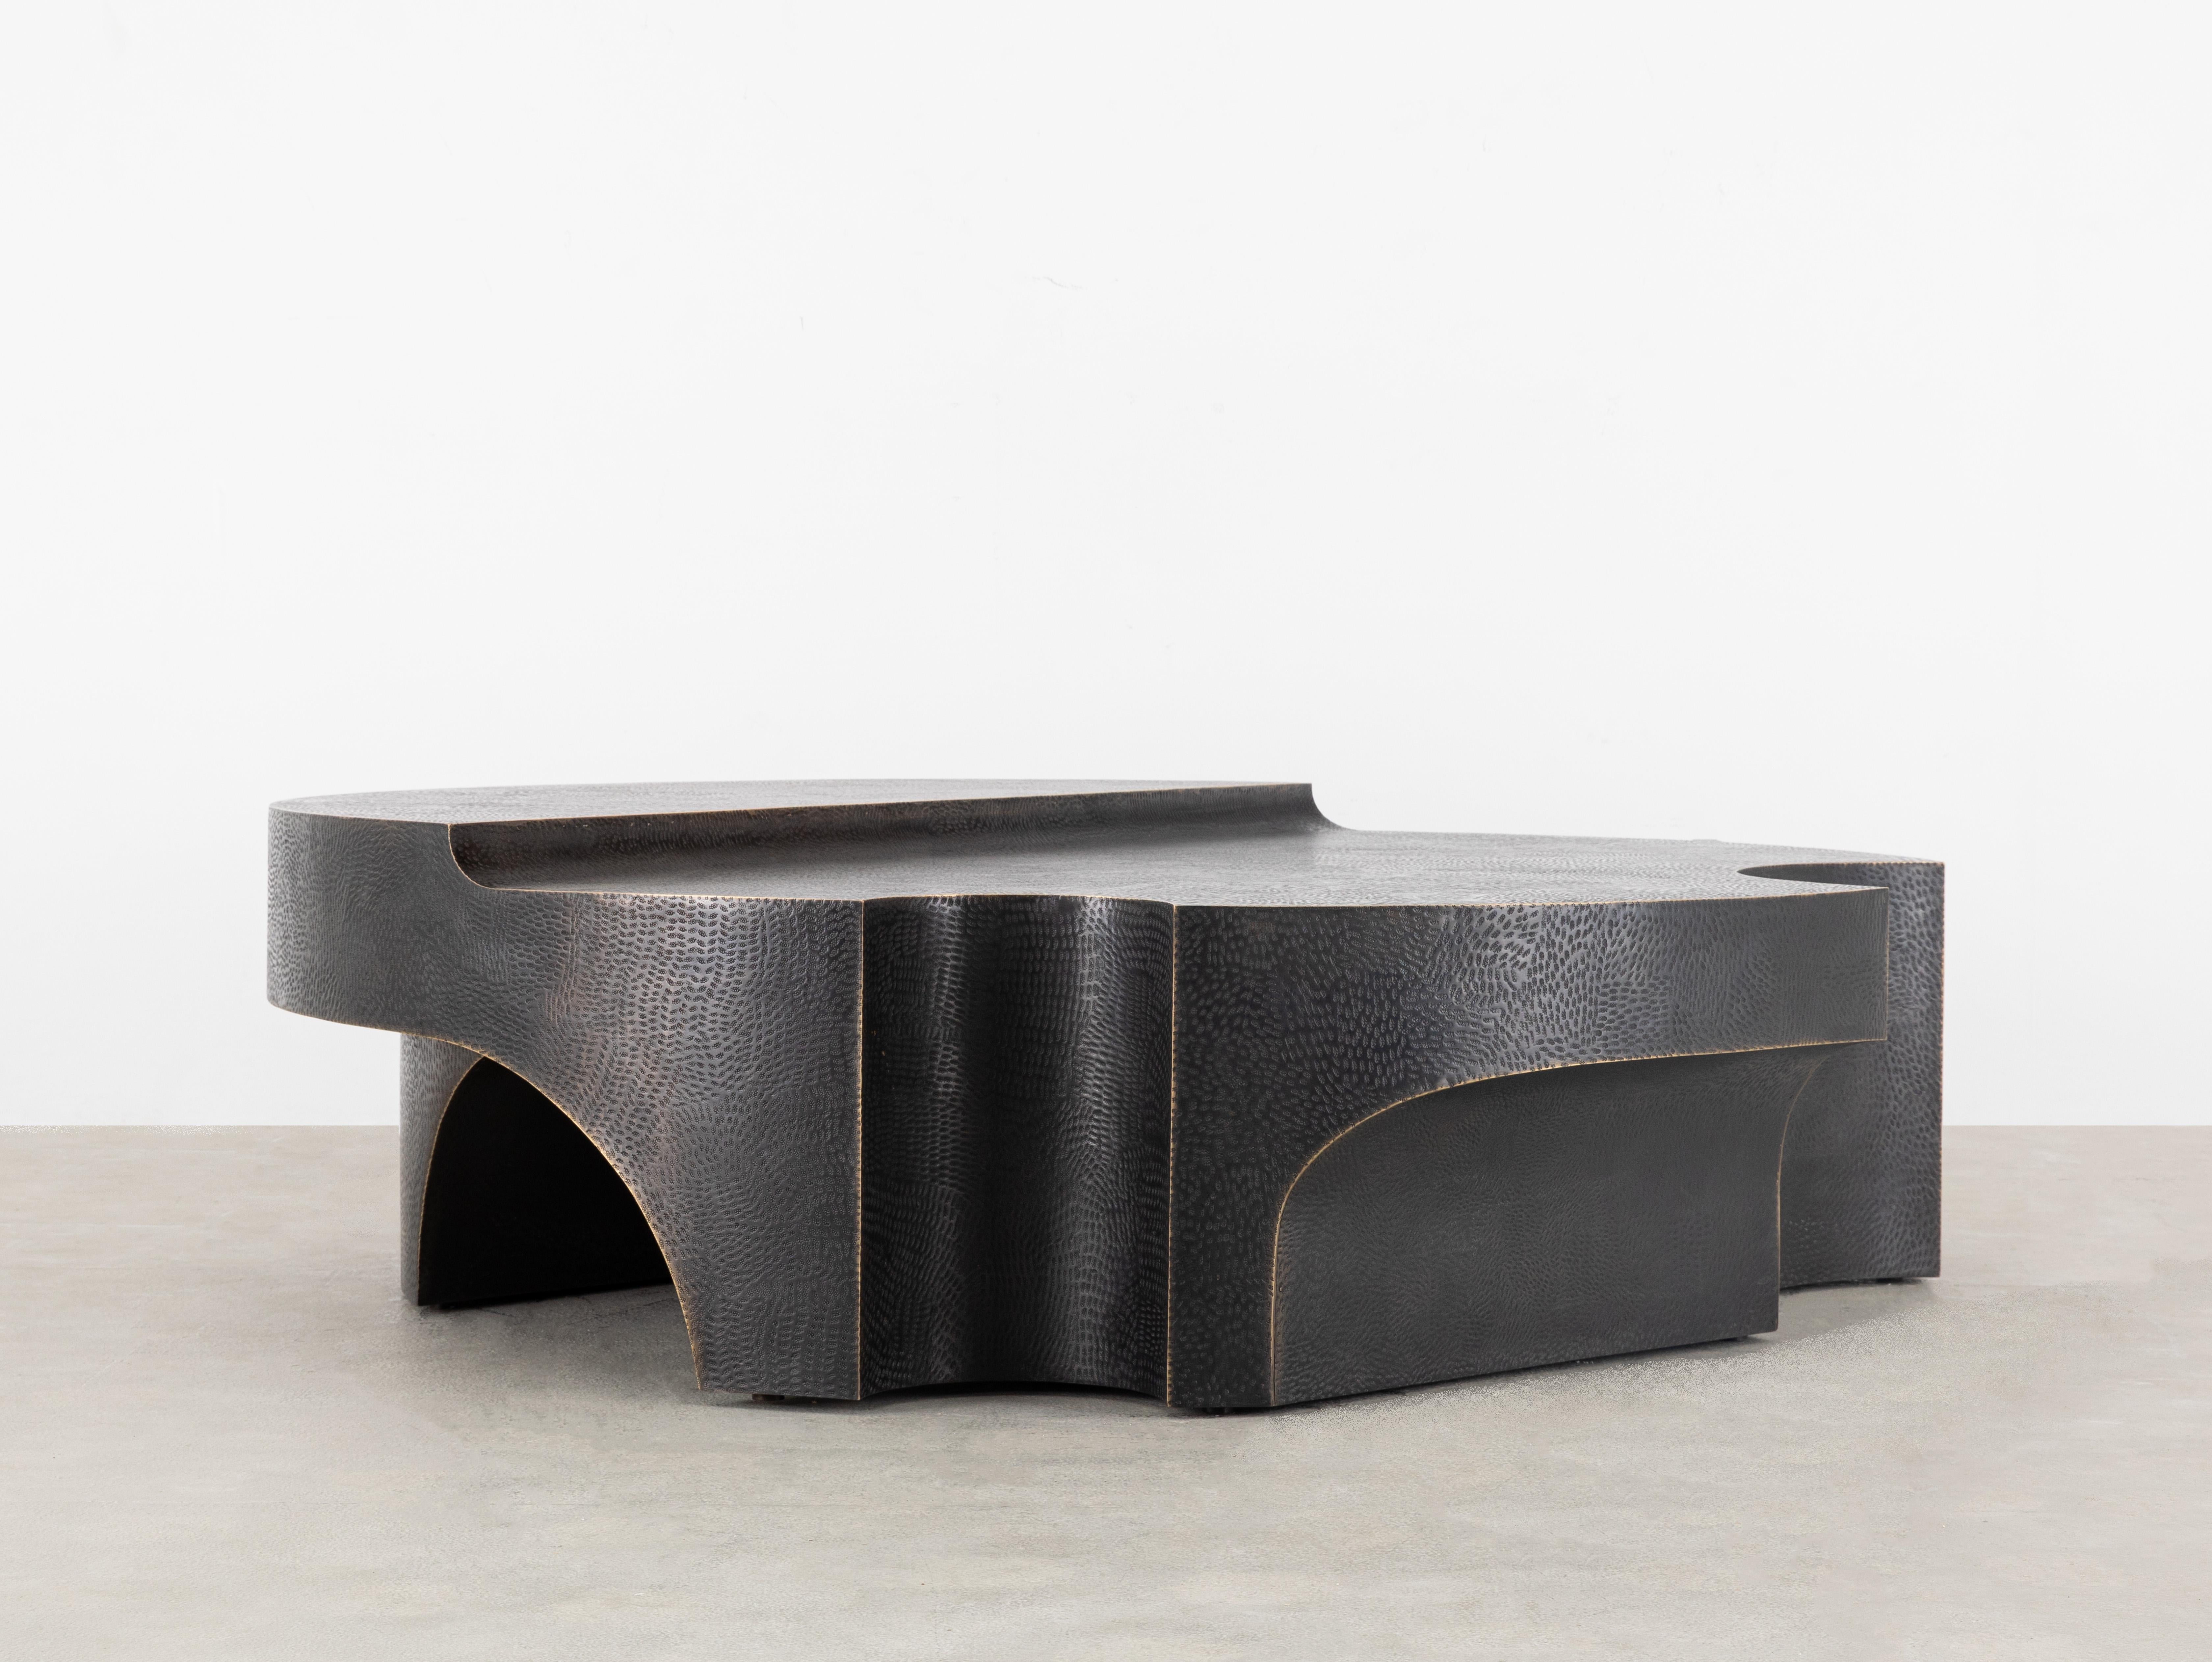 Inspired by the architecture style of the Italian Renaissance, this sculptural coffee table is crafted in brass by welding together several hammered, textured sheets of metal. The softness of the curves is juxtaposed with the linearity of the coffee